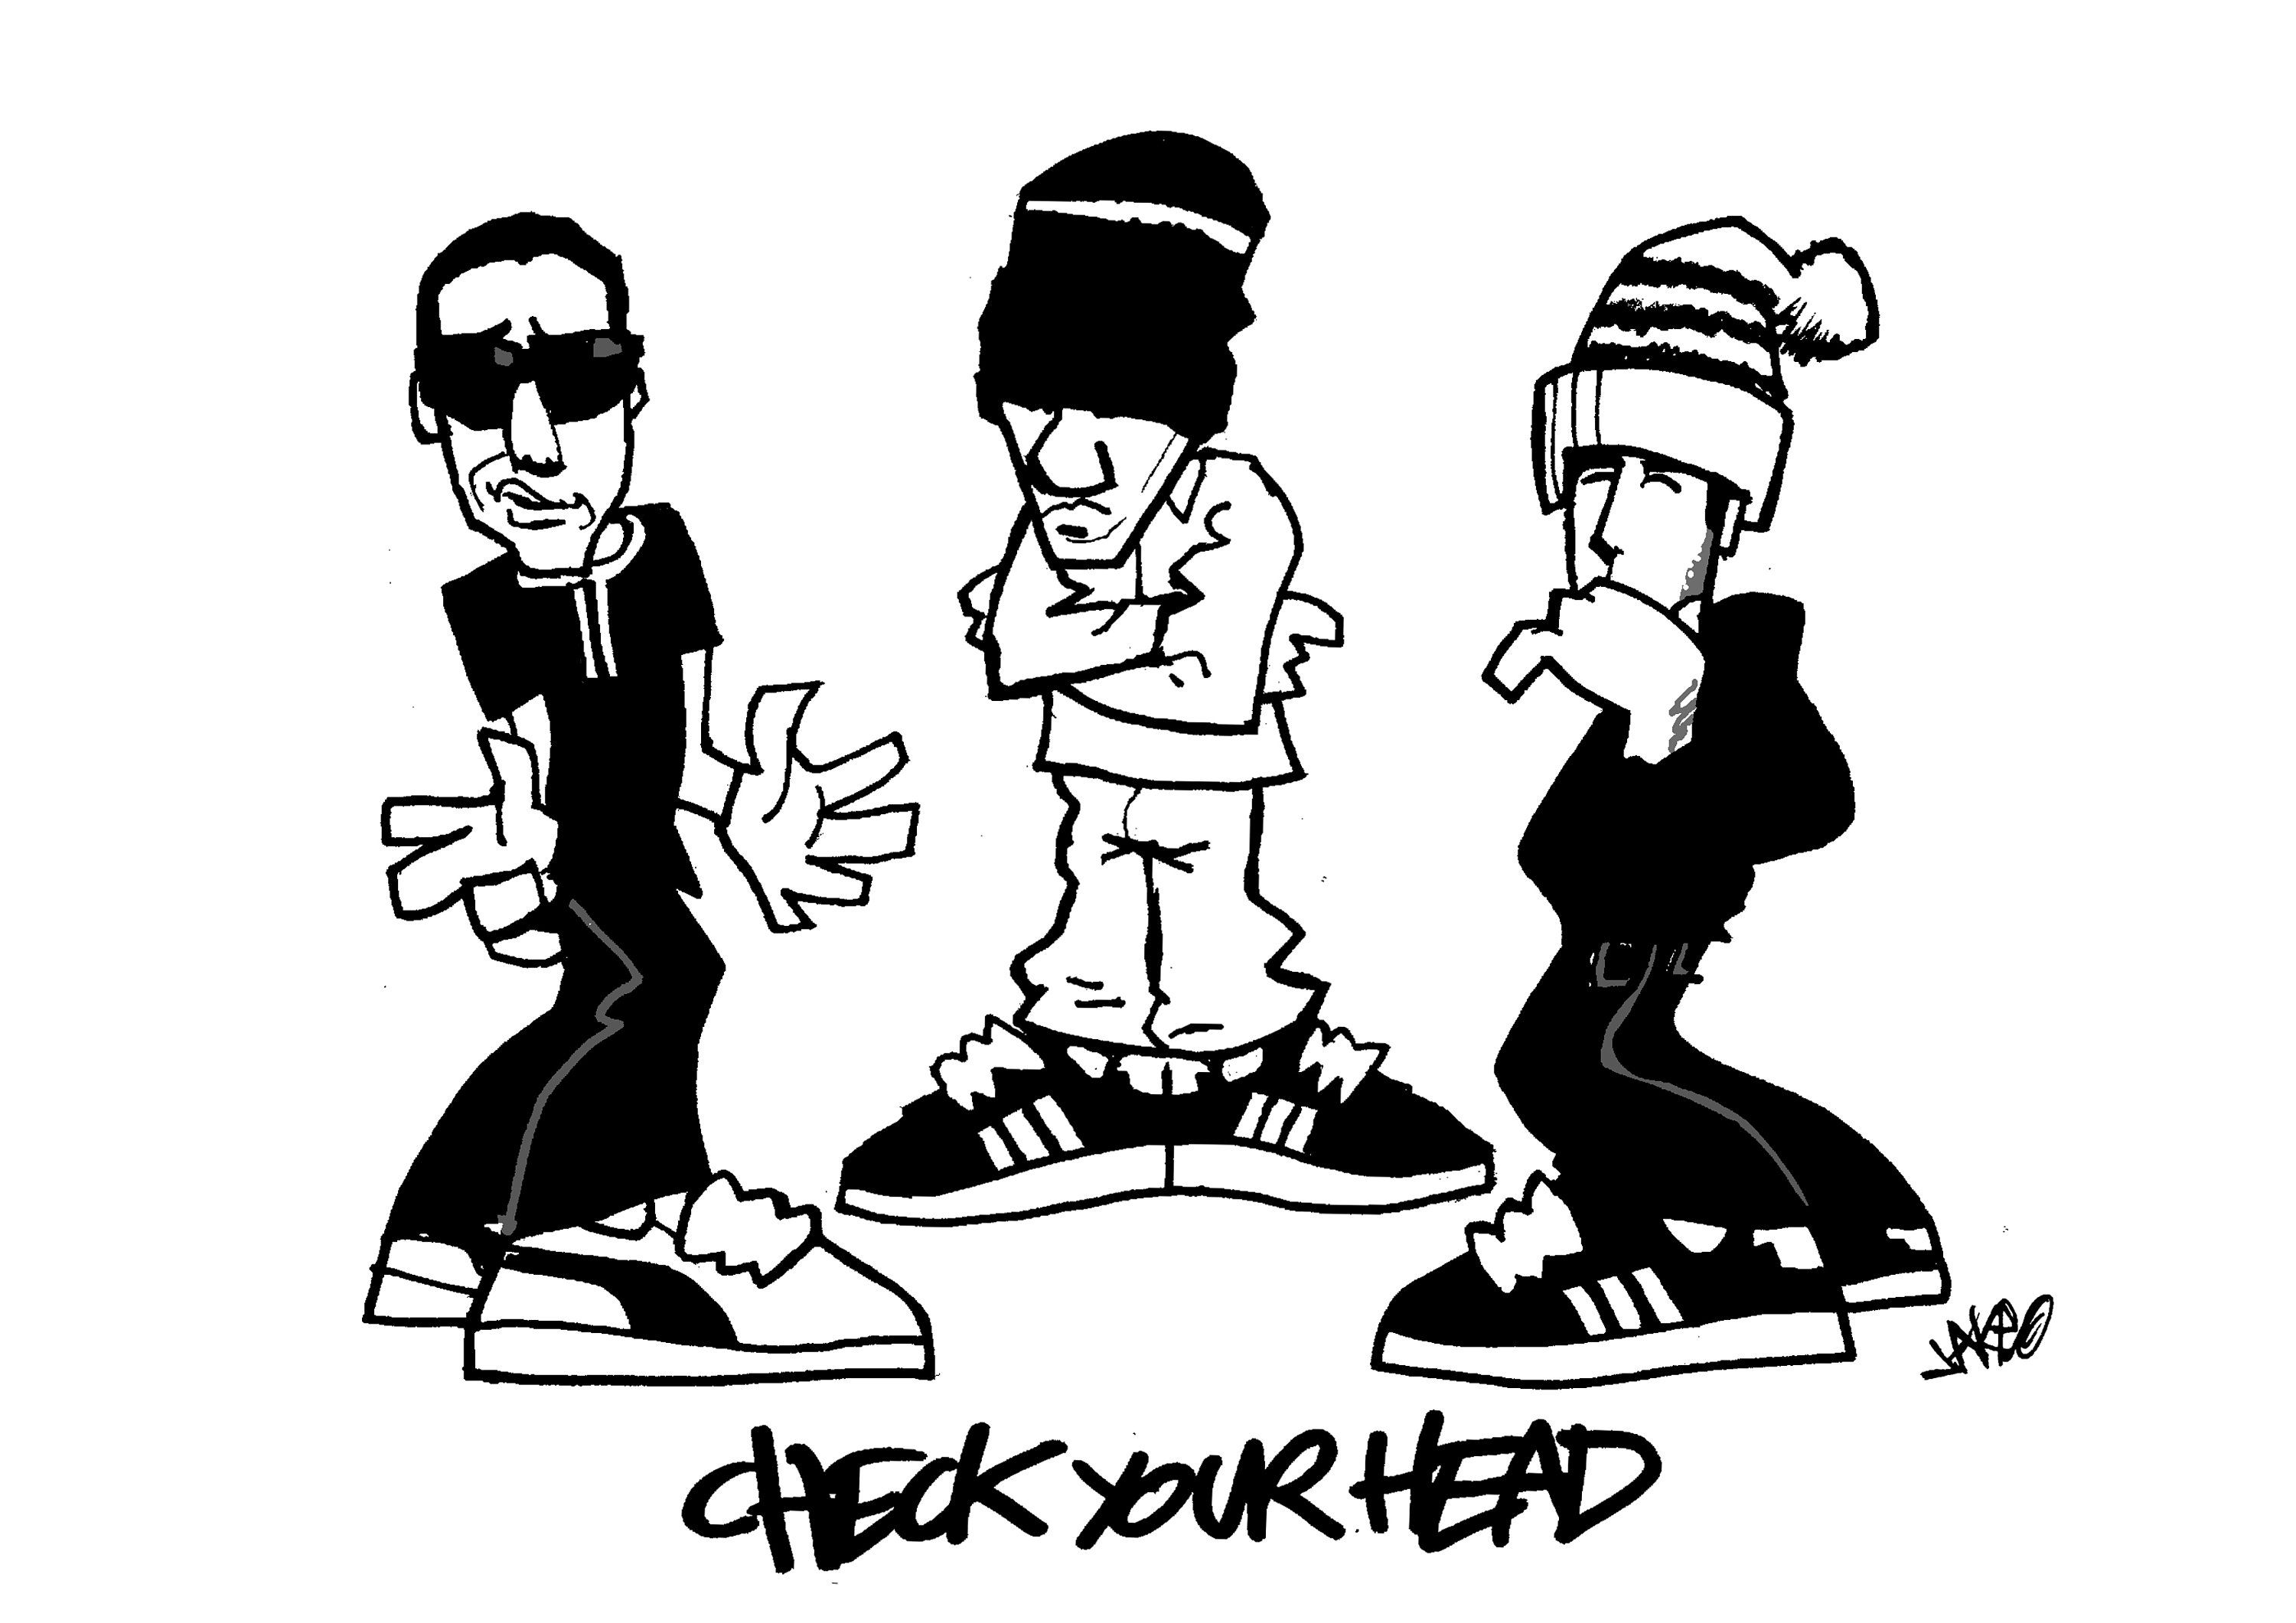 Champion teams up with Beastie Boys for exclusive 'Check Your Head'  anniversary collection 